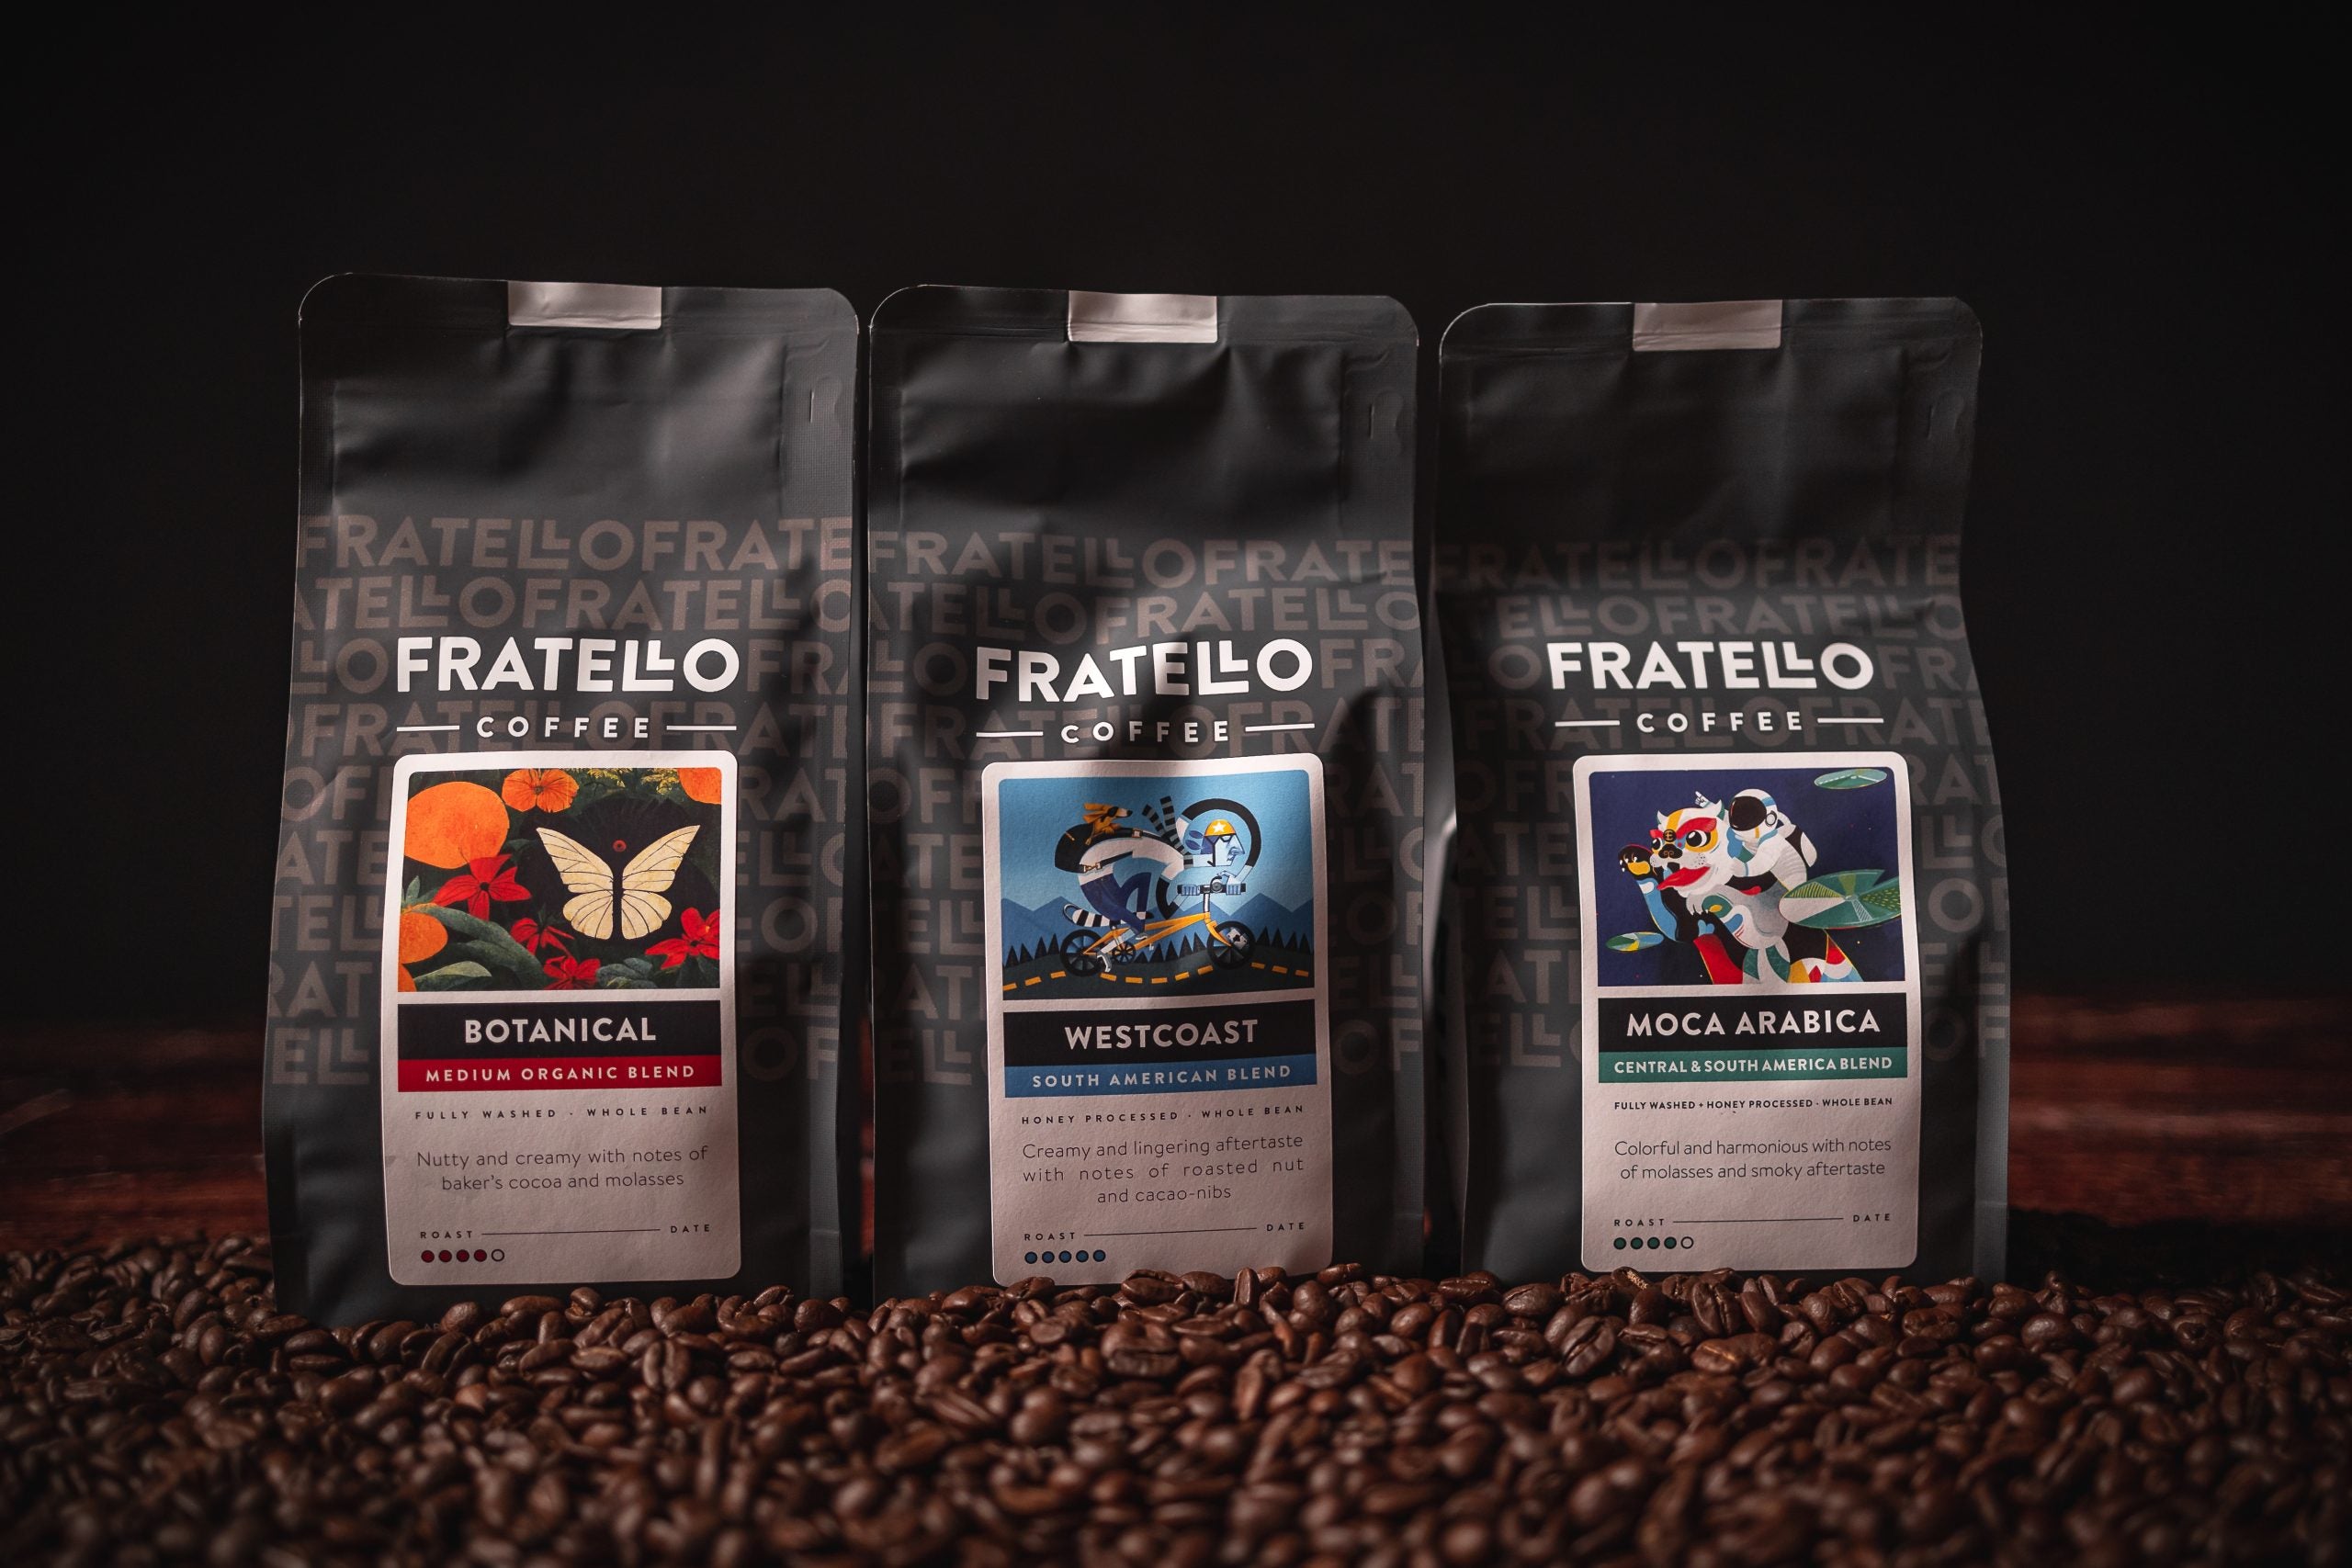 retail coffee beans for sale